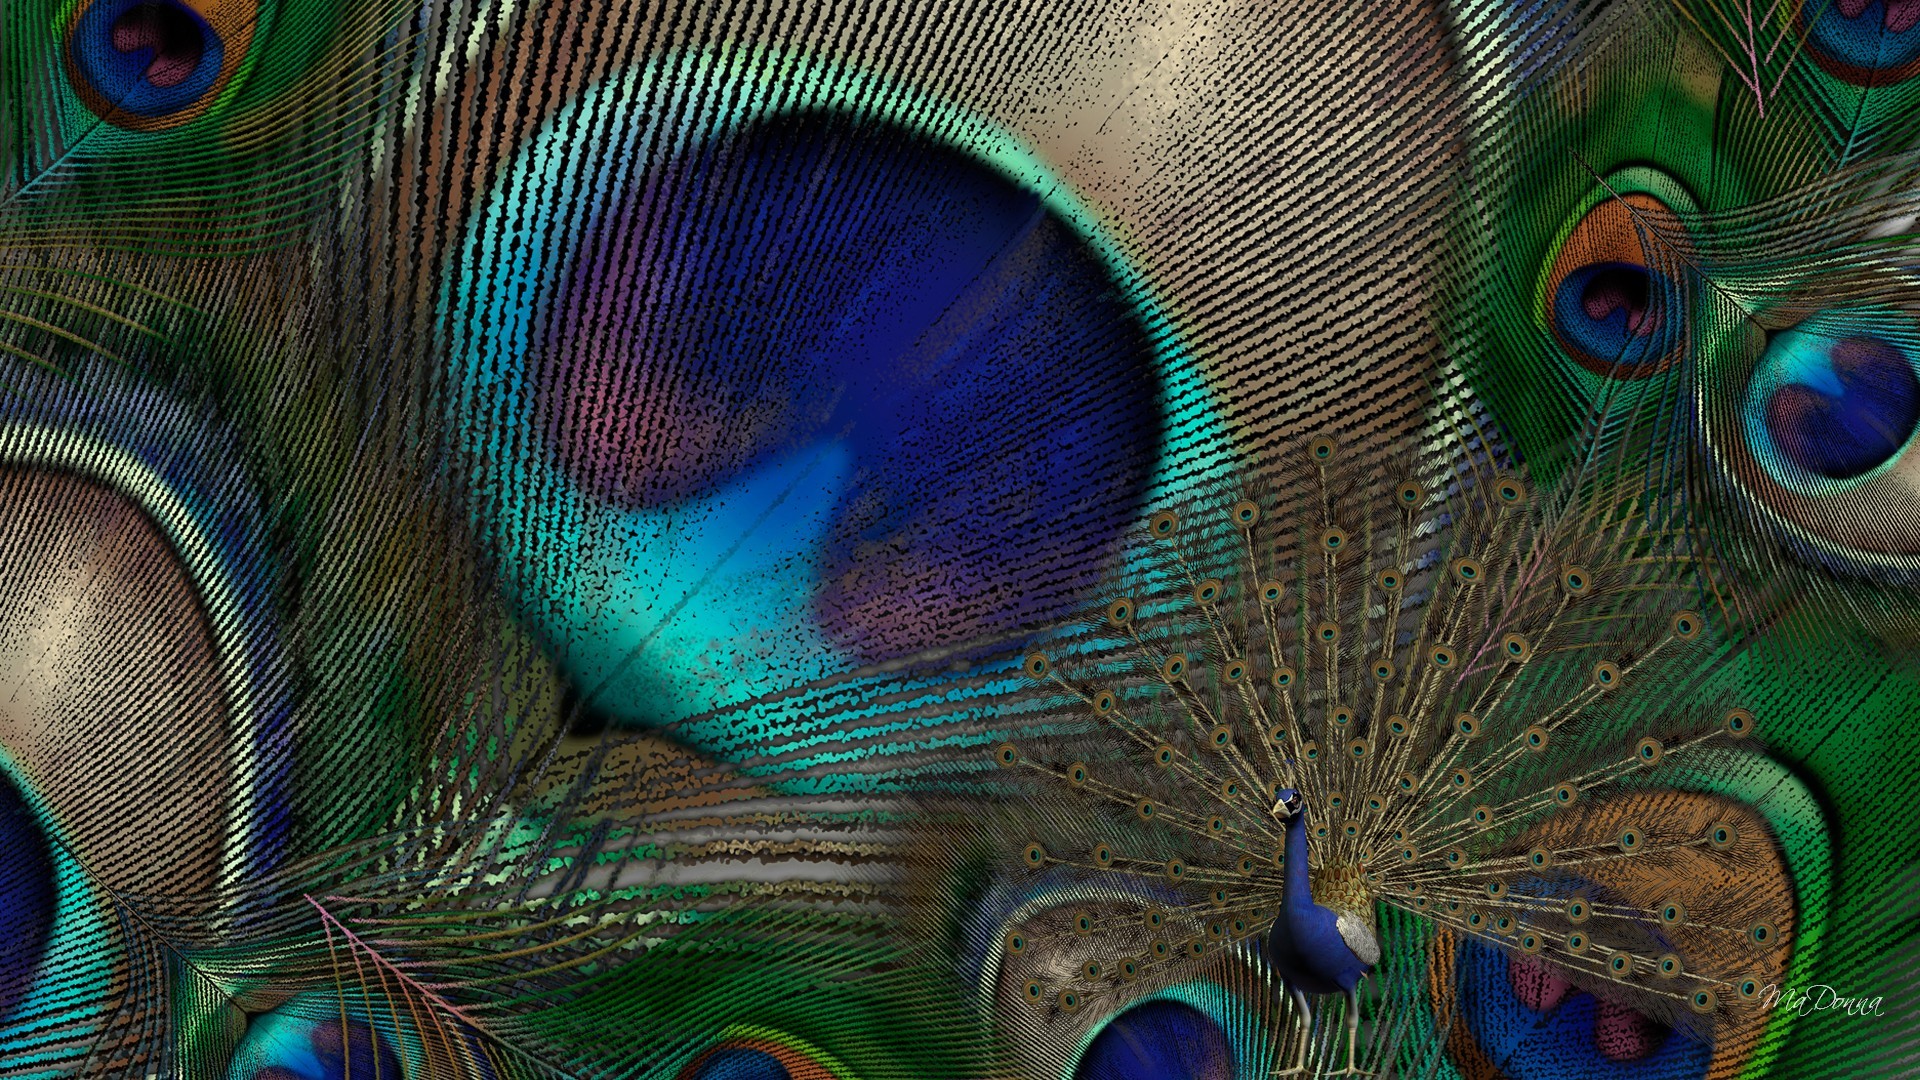 Peacock Feather Wallpaper.